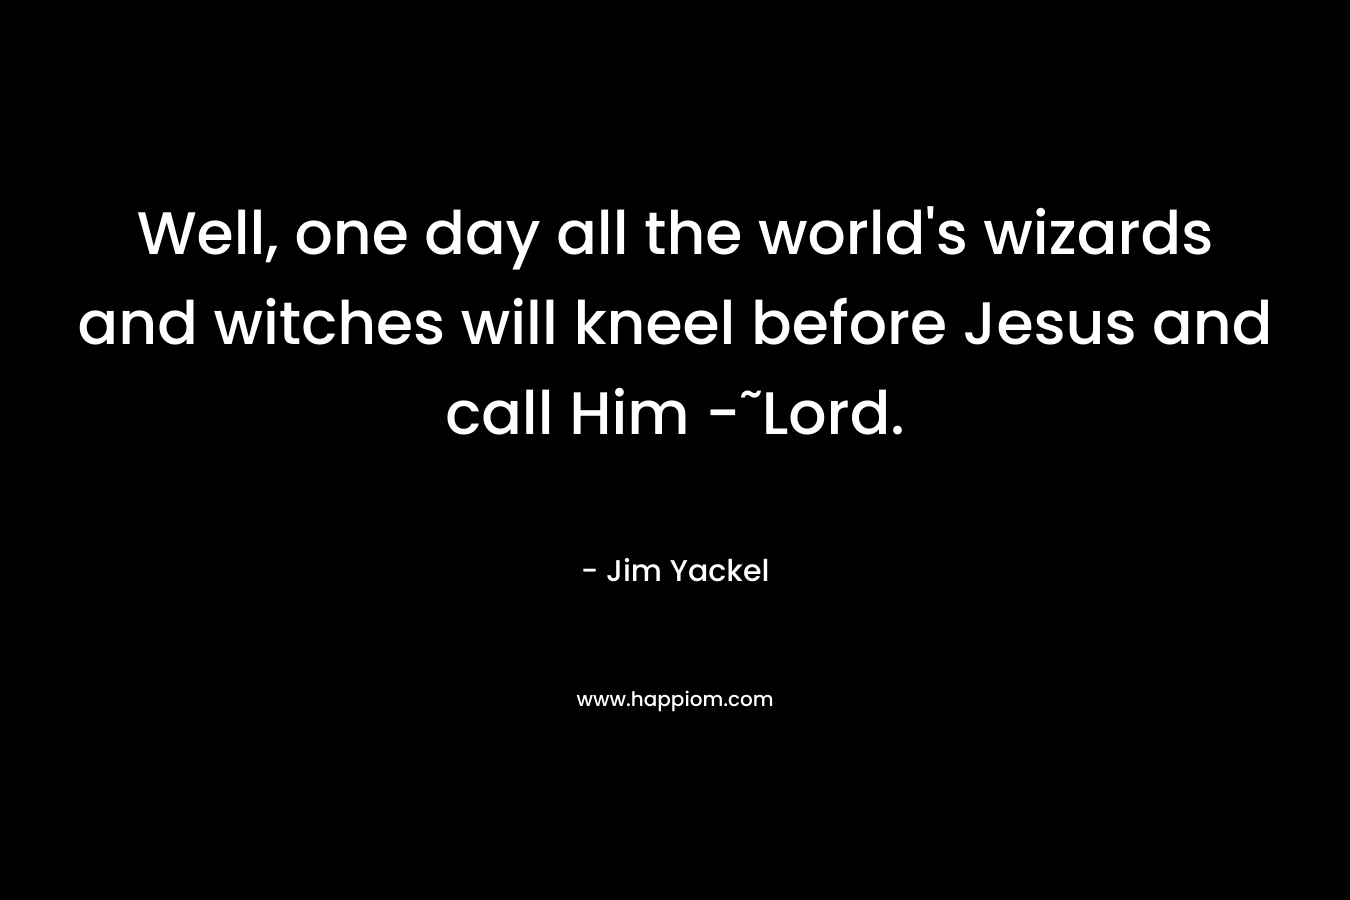 Well, one day all the world’s wizards and witches will kneel before Jesus and call Him -˜Lord. – Jim Yackel